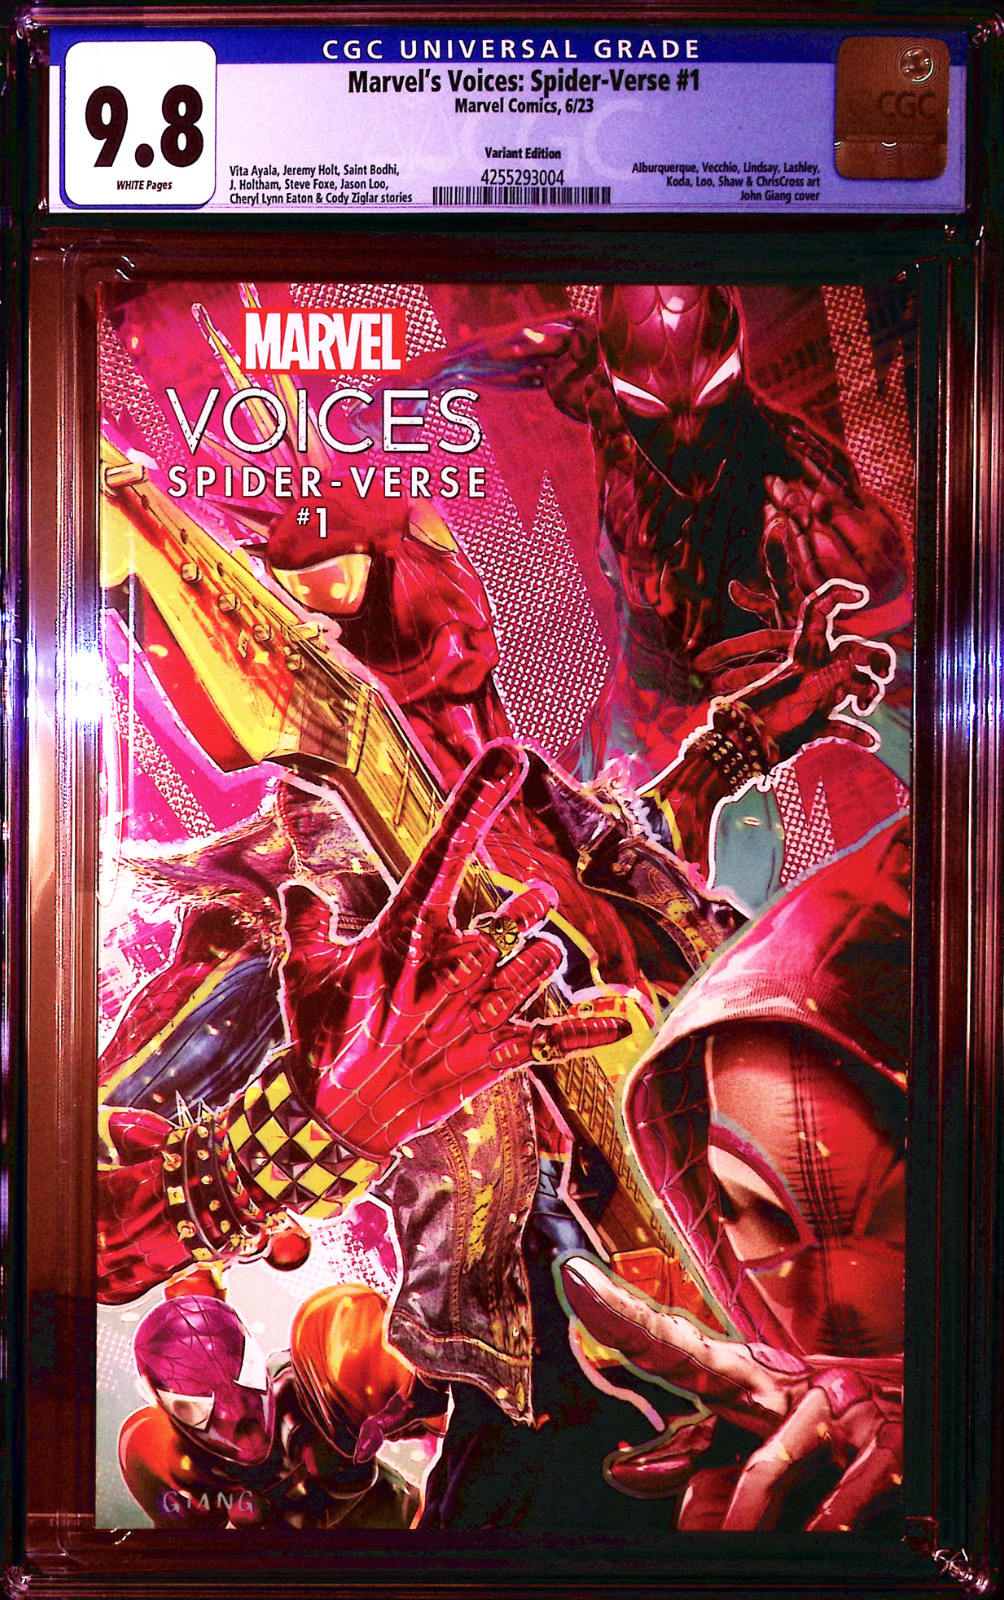 Marvel's Voices Spider-Verse 1 CGC 9.8 Giang Variant